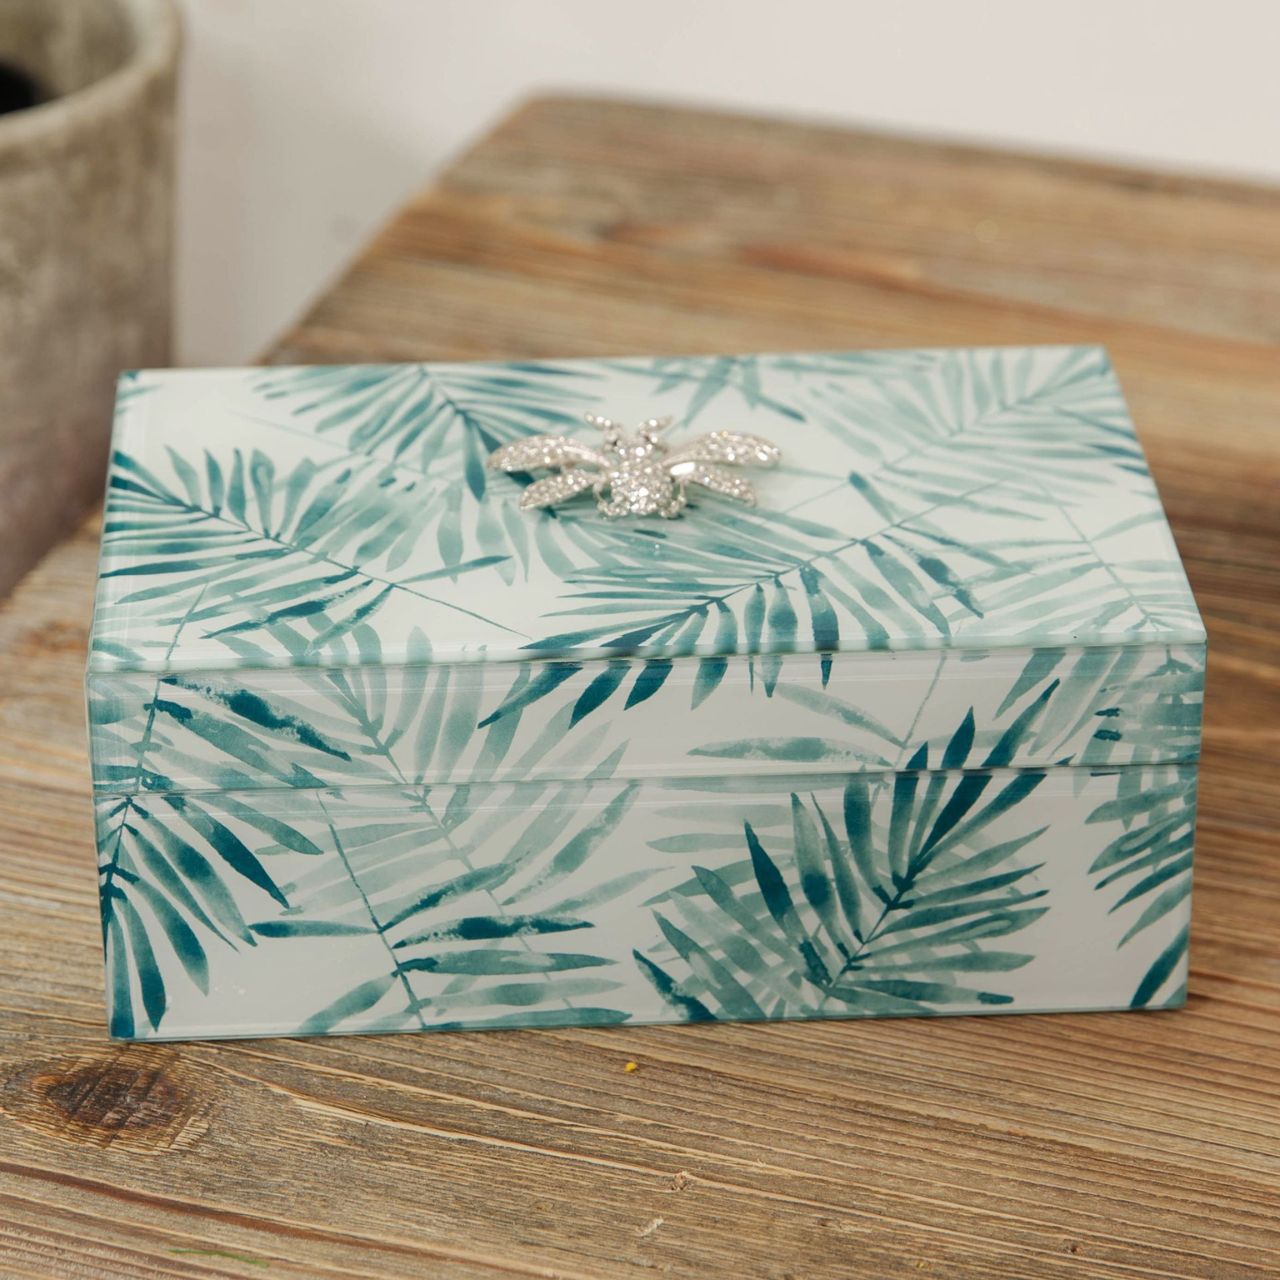 Nature Trail Embellished Jewellery Box  Store those sparkly things in style with this beautiful glass jewellery box with exotic palm print and crystal embellished inset lid decoration. From Nature Trail by HESTIA - bring some subtle Spring vitality to your home.